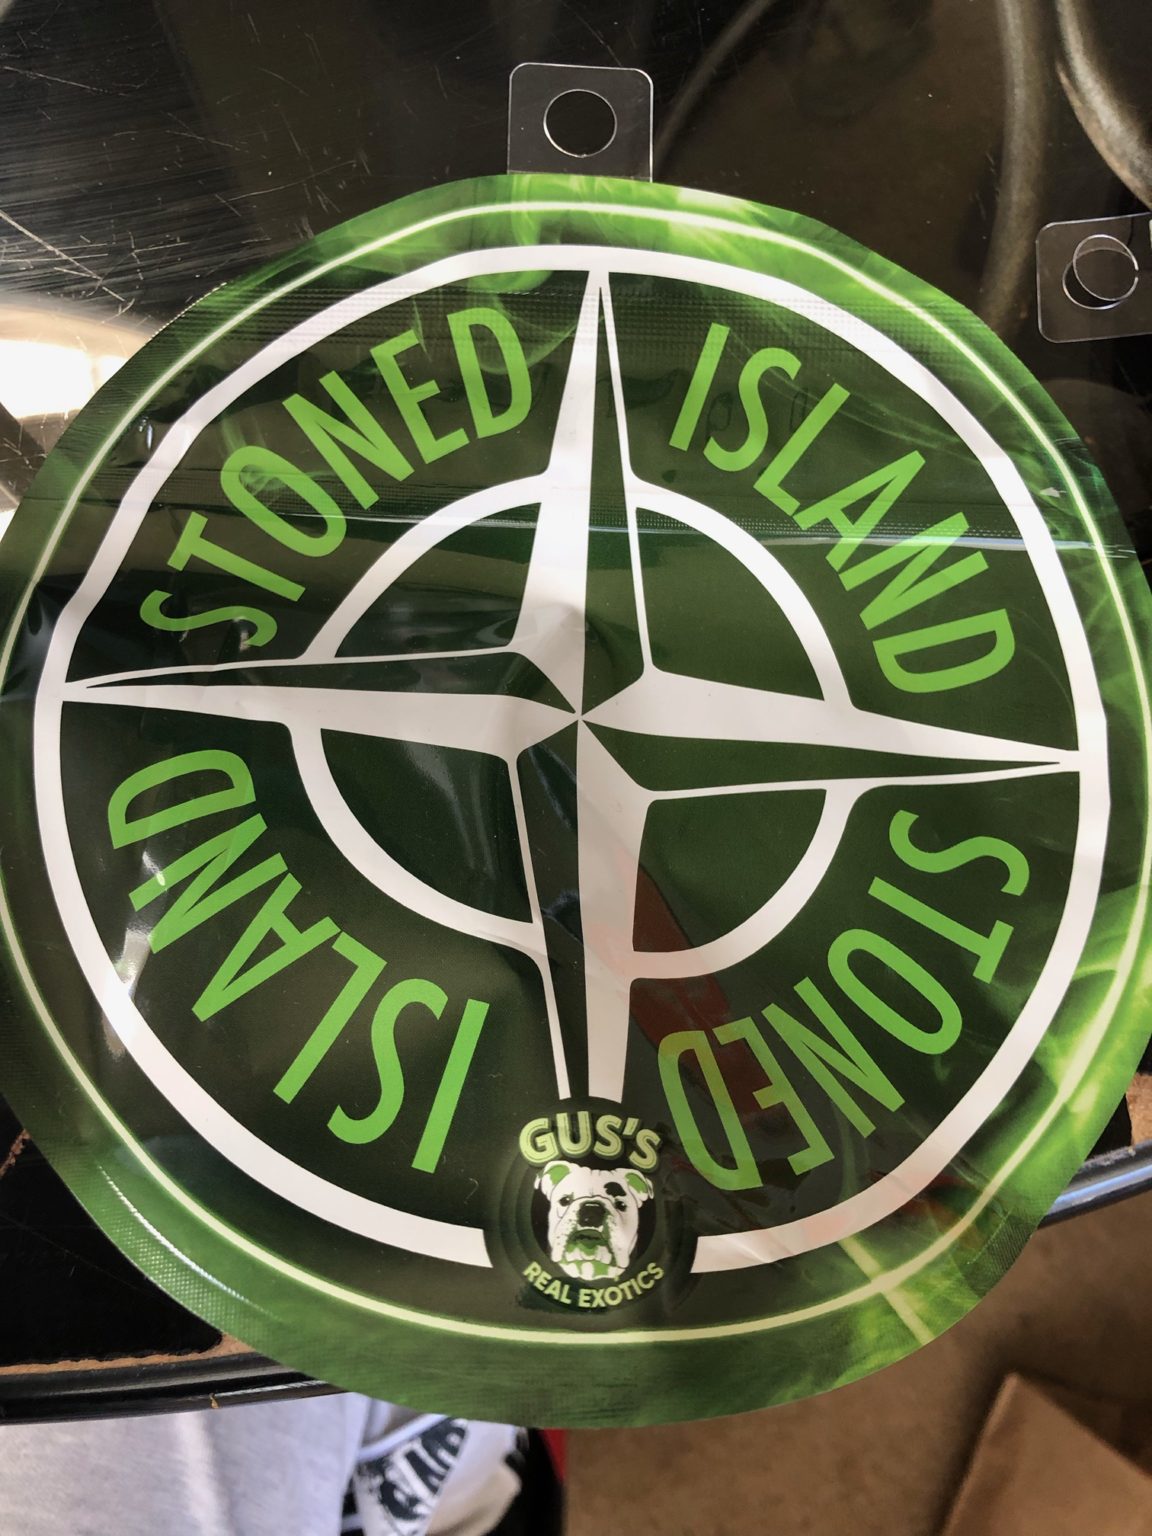 Stoned Island, by Gus’s Real Exotics - The Highest Critic